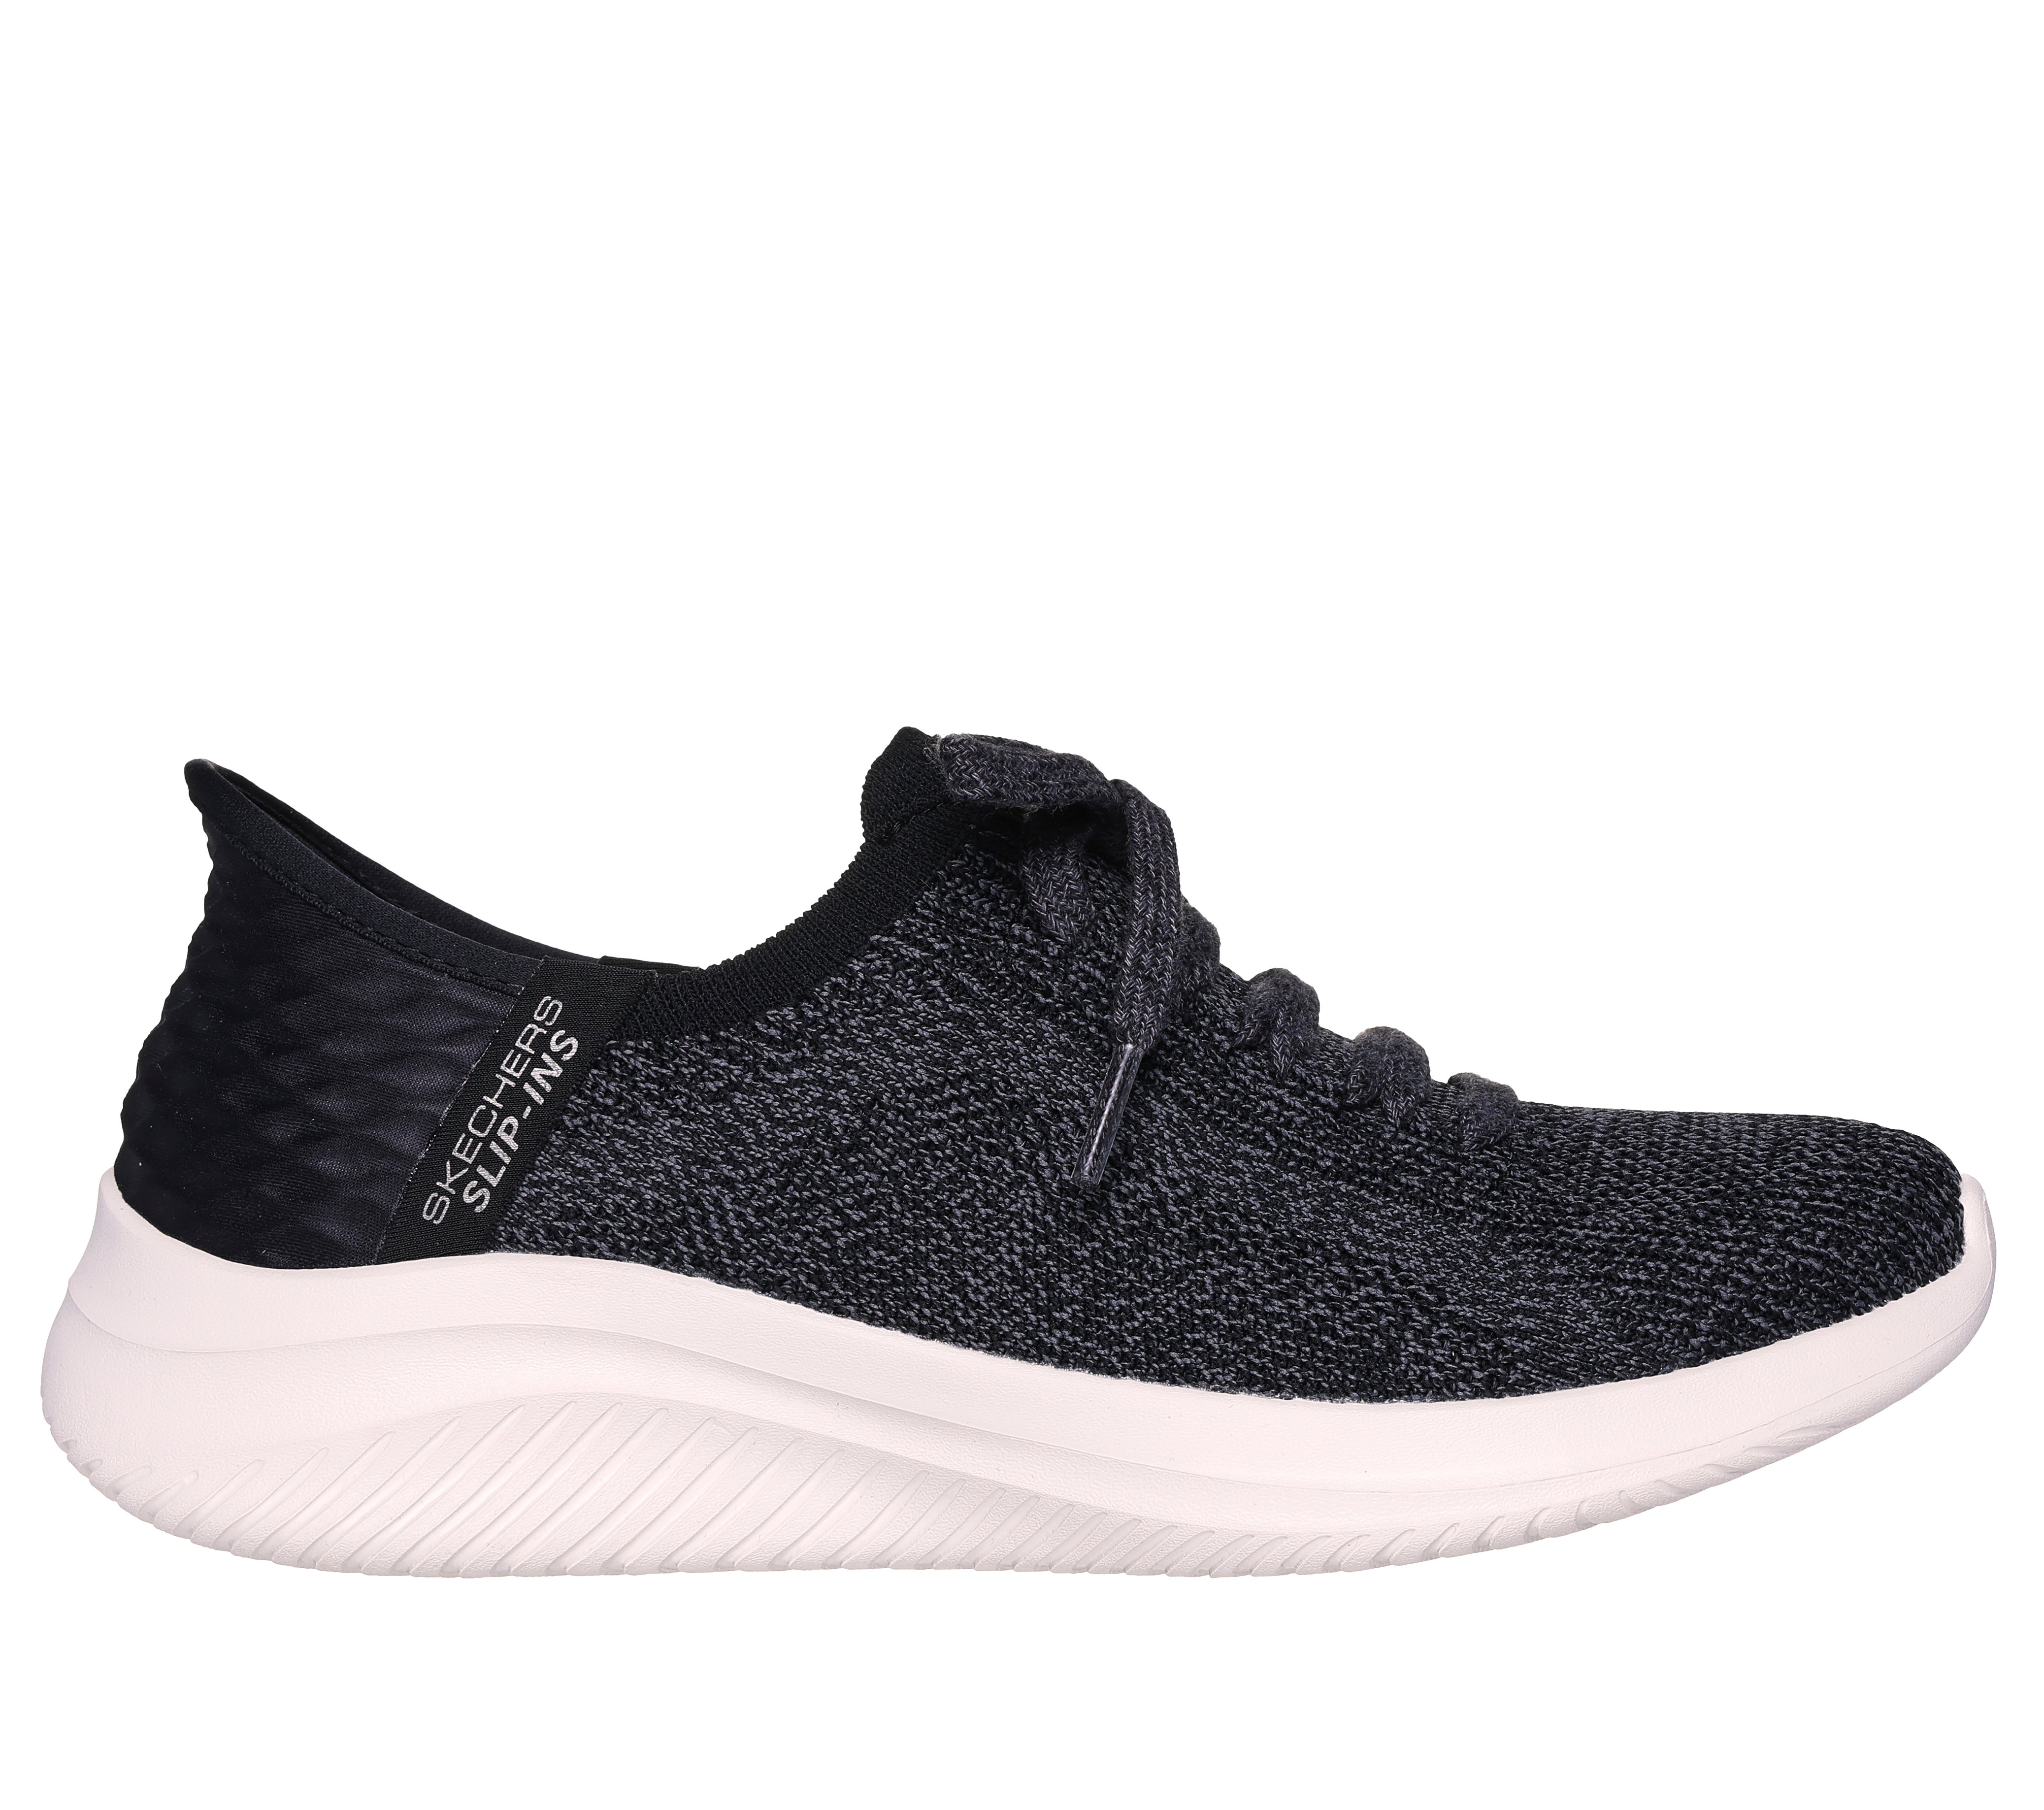 Official 20% Off Coupon, Promo Codes, Free Shipping | SKECHERS